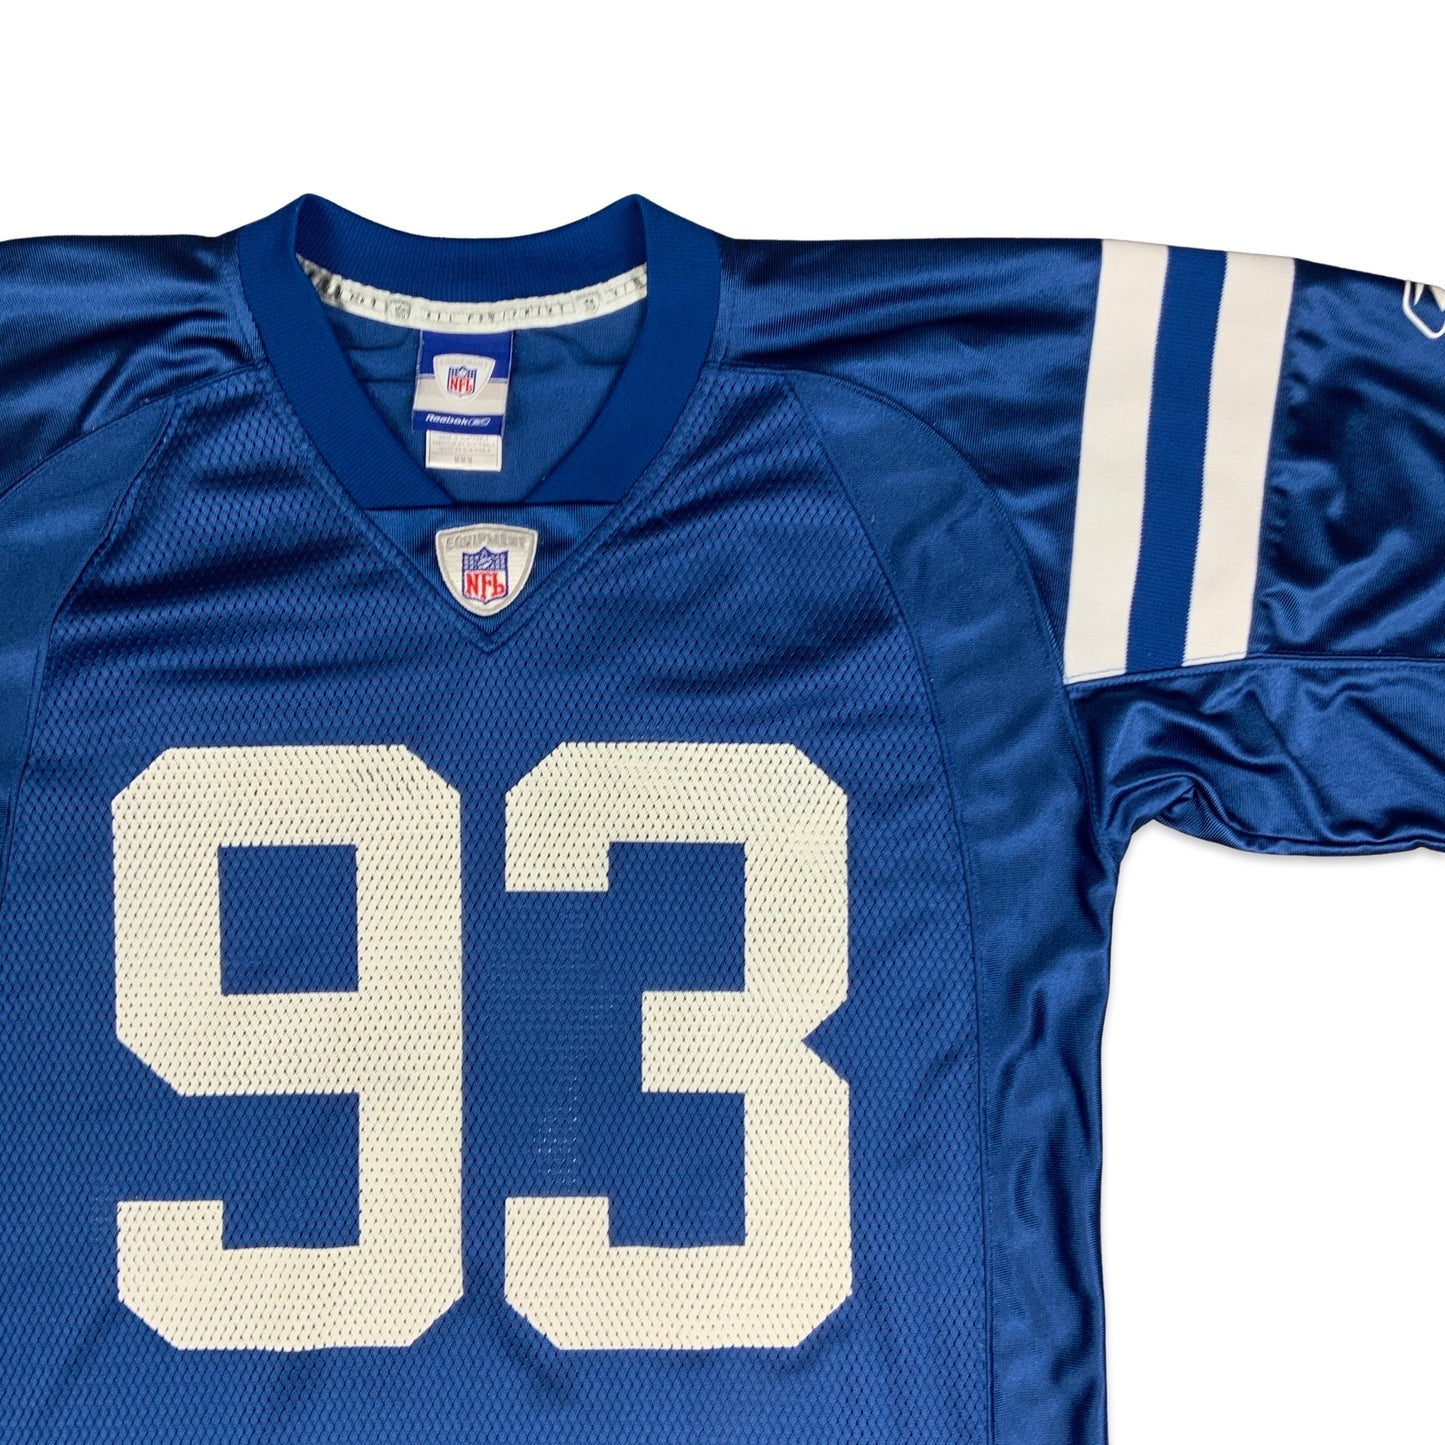 Indianapolis Colts Dwight Freeney Blue Jersey M L